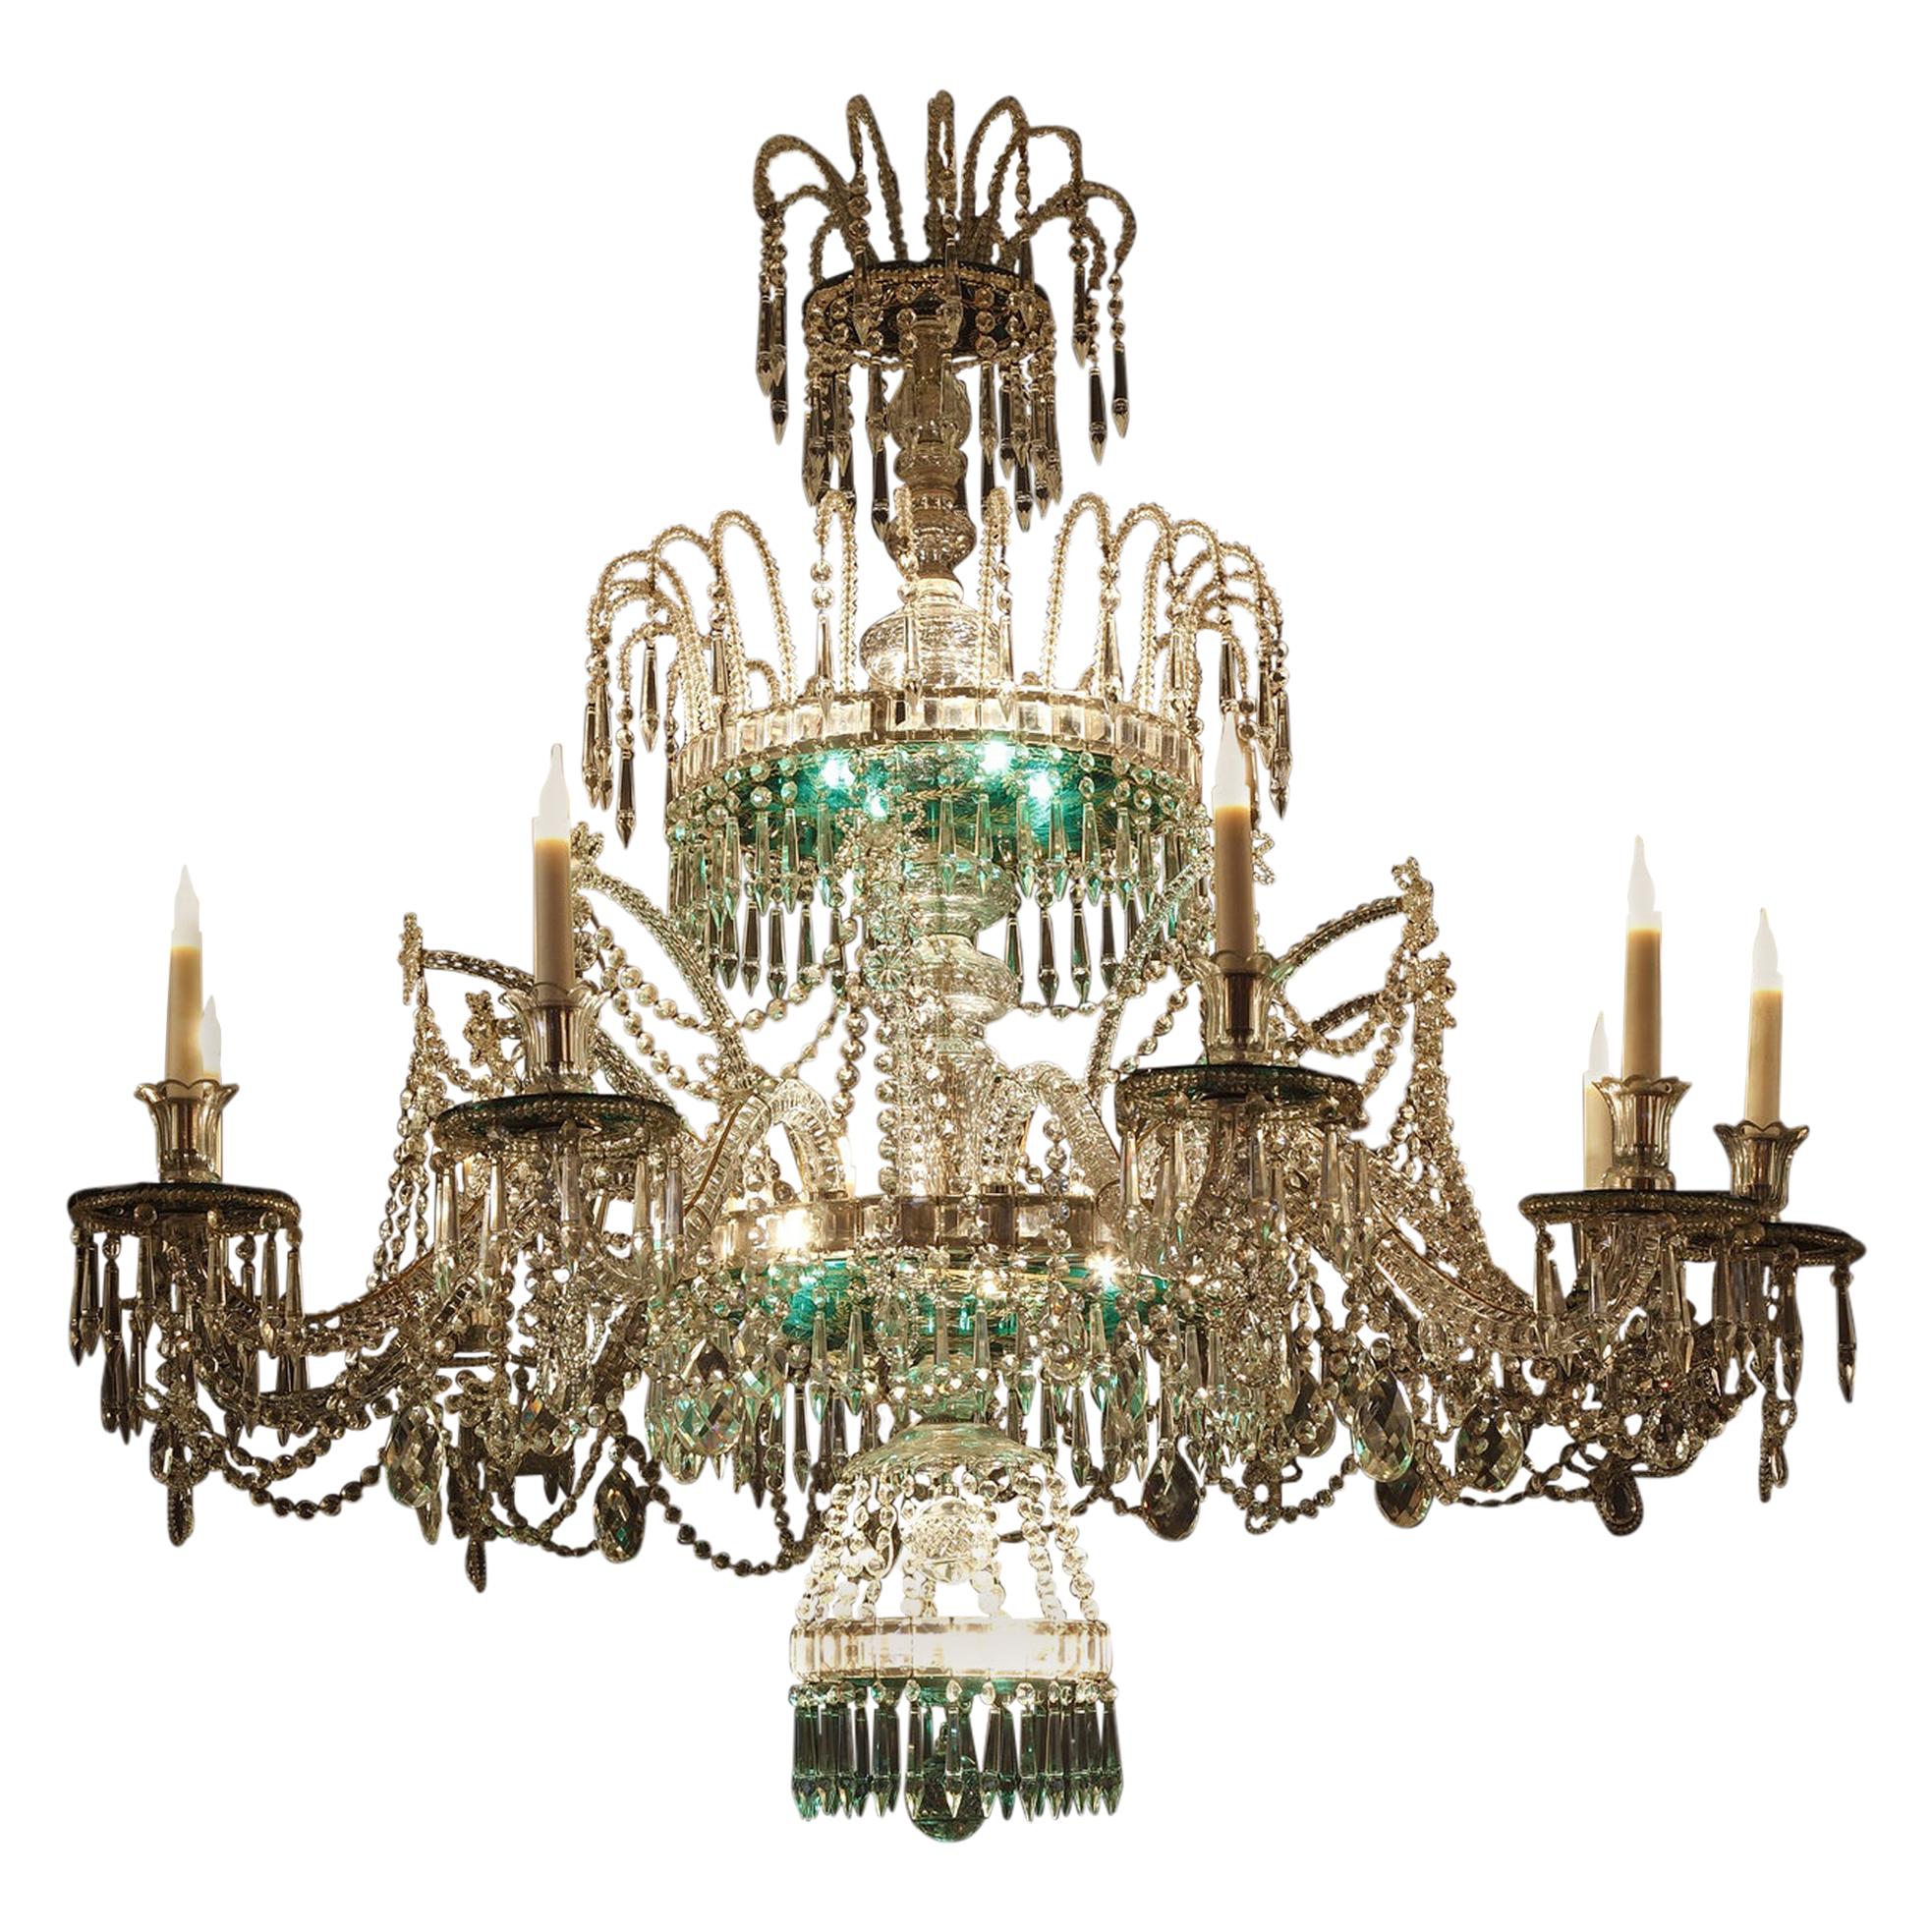 Chandelier Crystal Attributed to the Granja Manufacture, Spain, Circa 1900